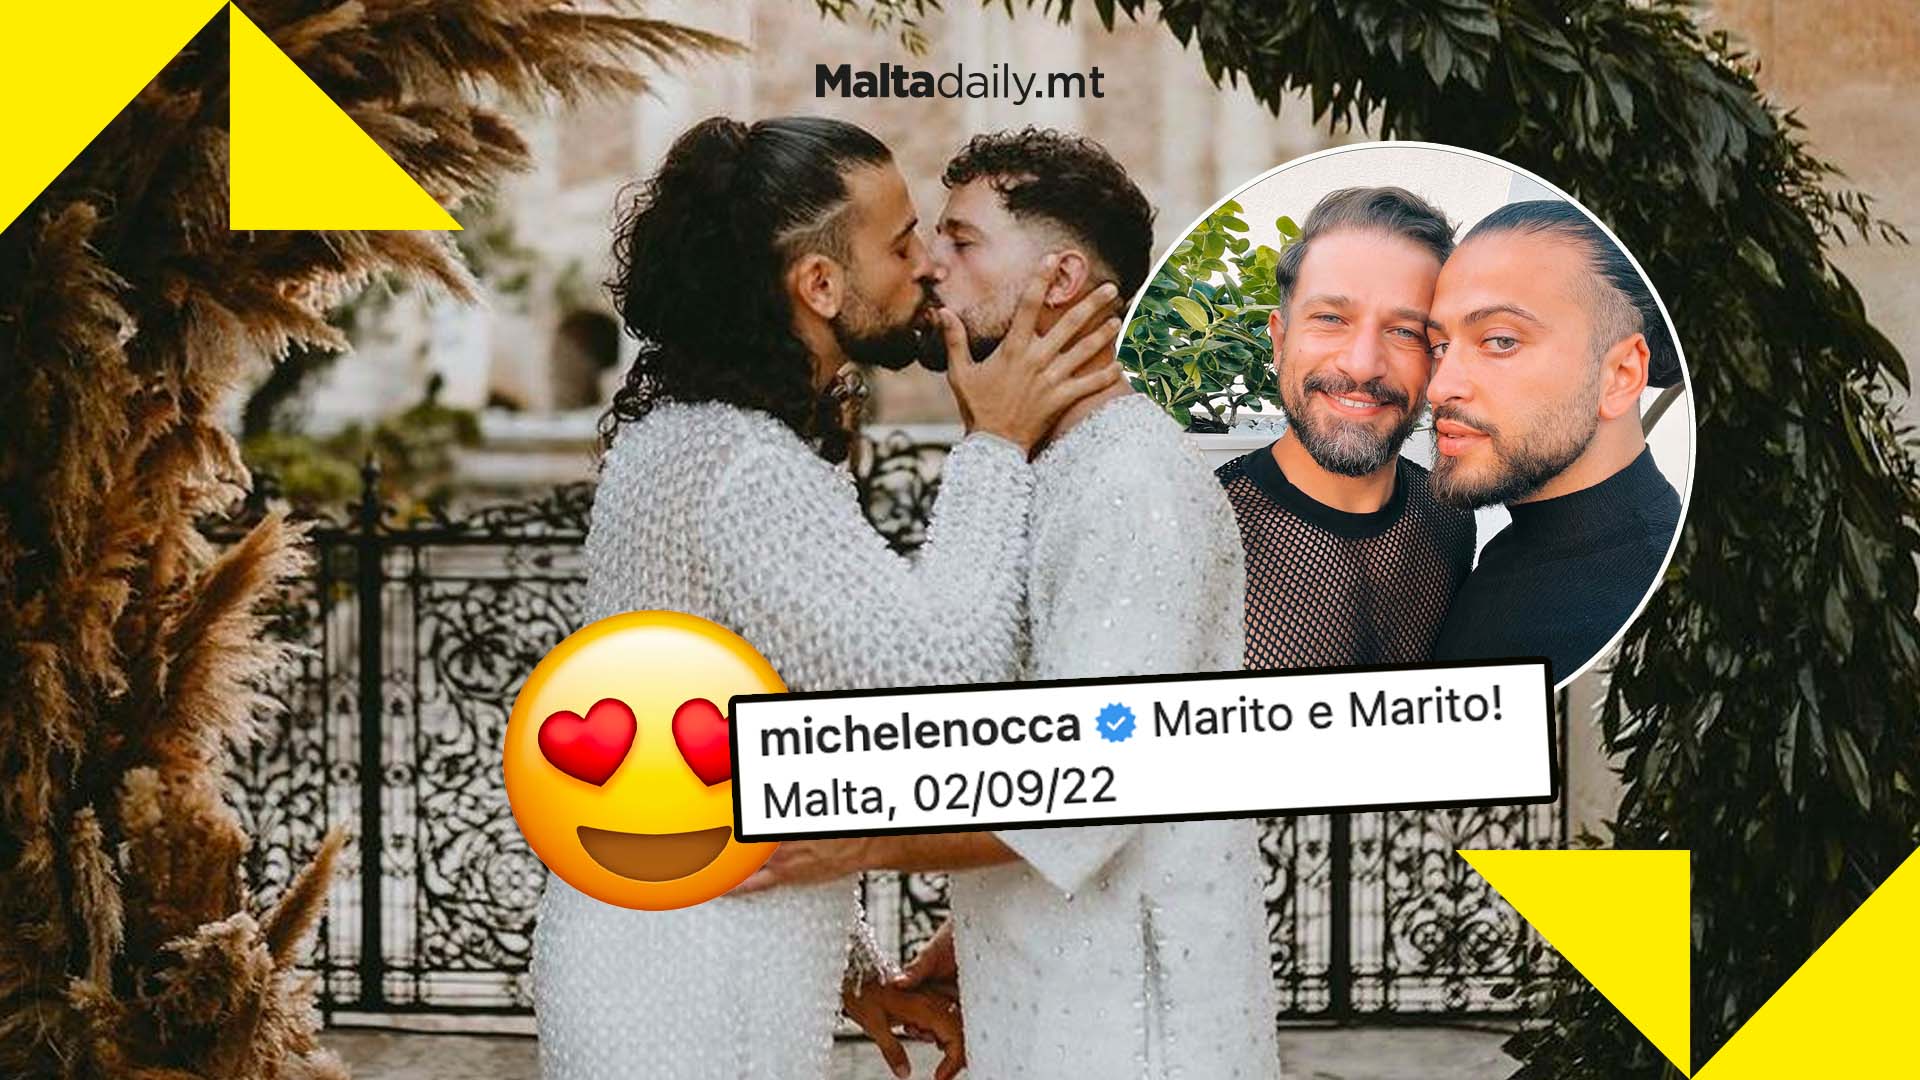 Ex-Amici dancer ties knot with Maltese husband in local wedding